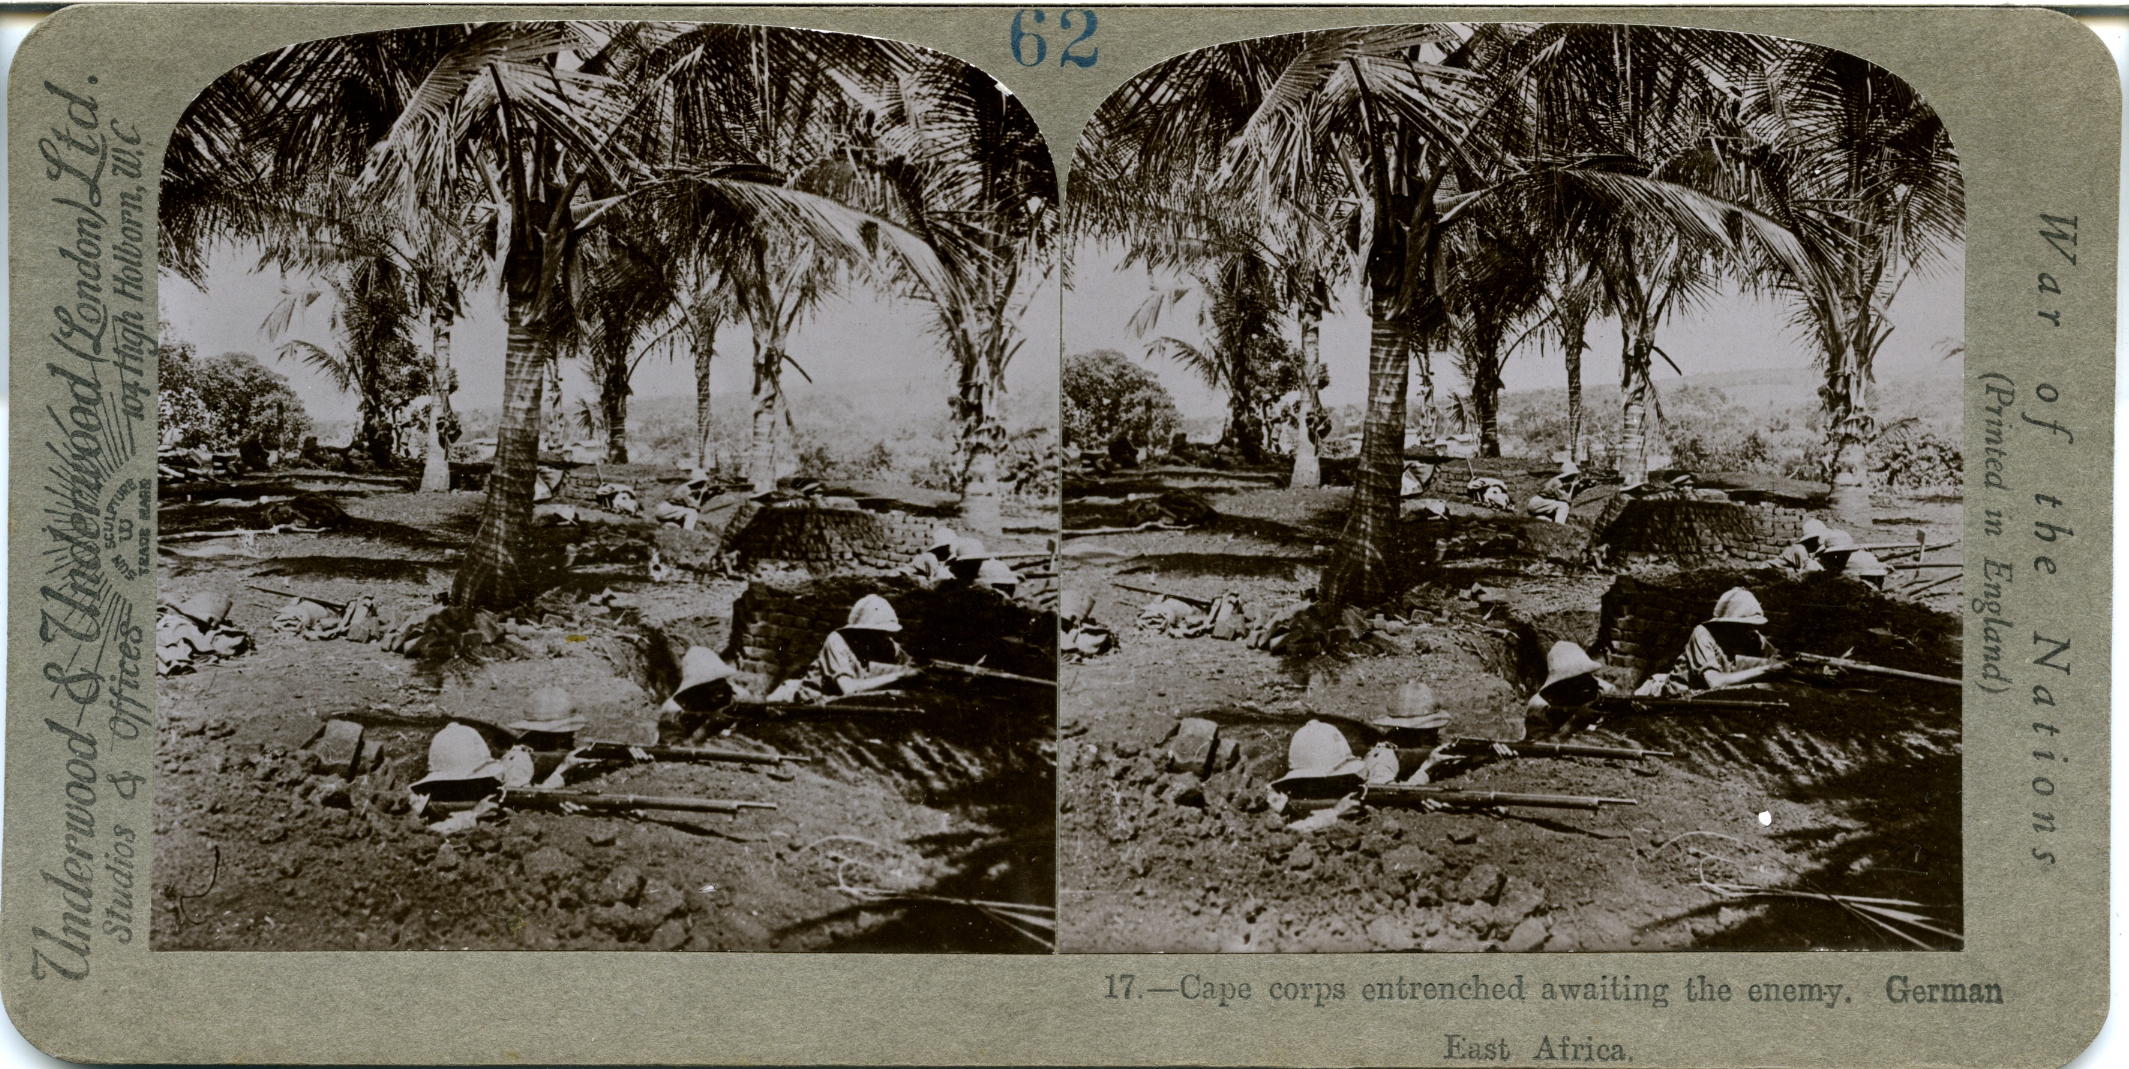 Cape corps entrenched awaiting the enemy. German East Africa